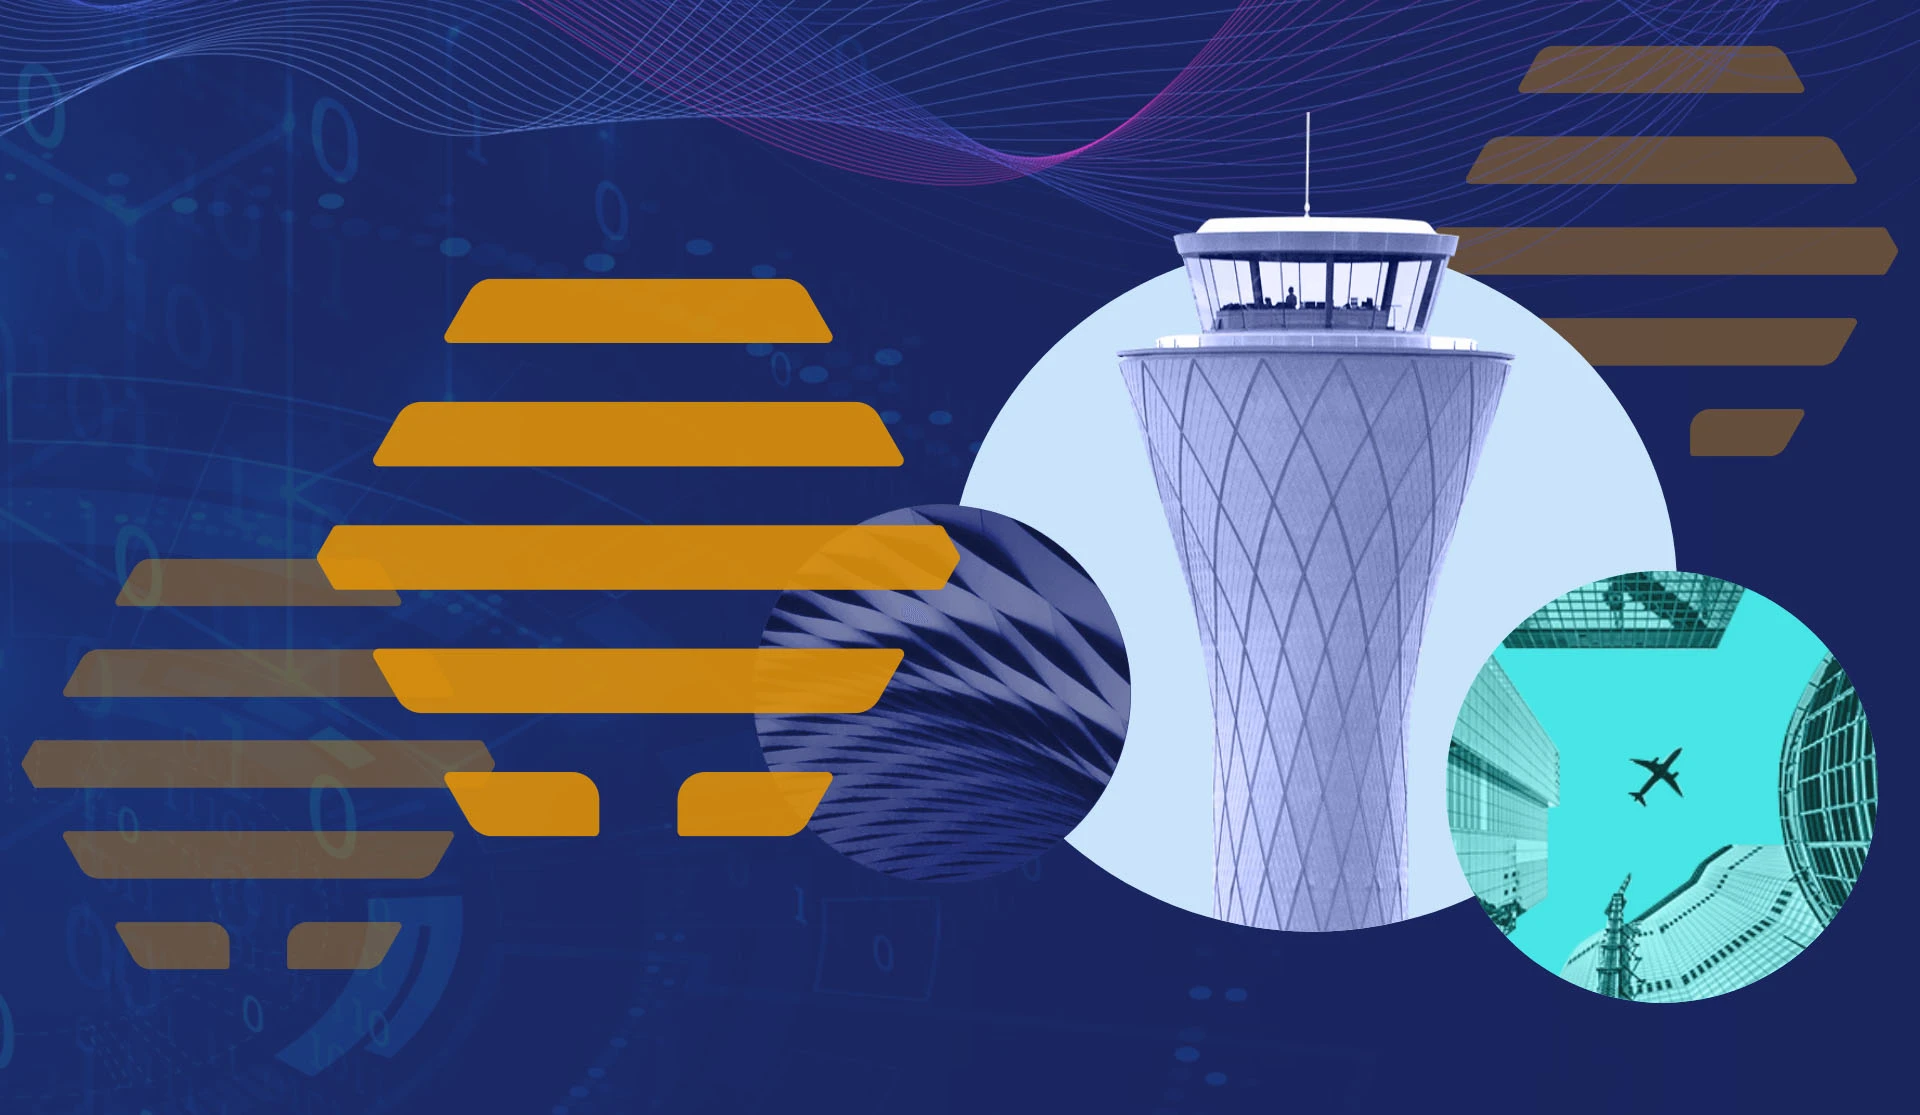 Image illustrating the partnership between RDC Aviation and Azinq to integrate LOOP into Airport Hive. The image shows elements of an airport, energy waves and data with the Airport Hive logo.